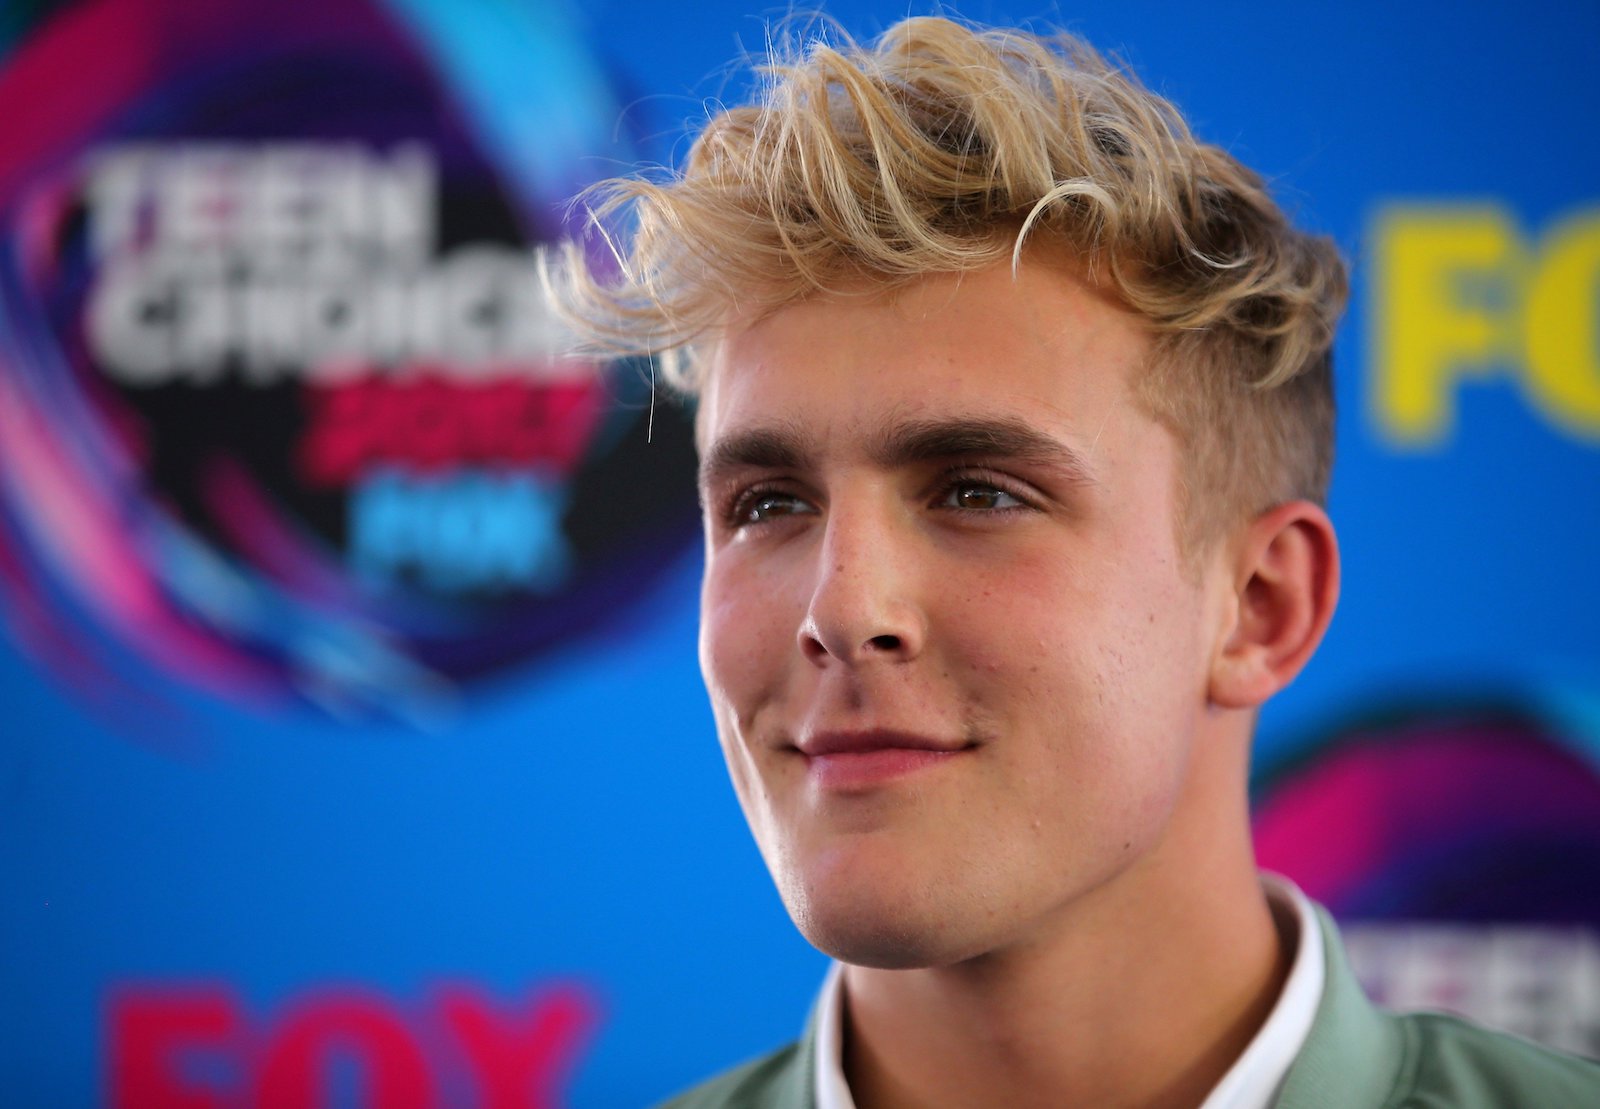 Did Jake Paul sexually assault this TikToker? Twitter users speak out